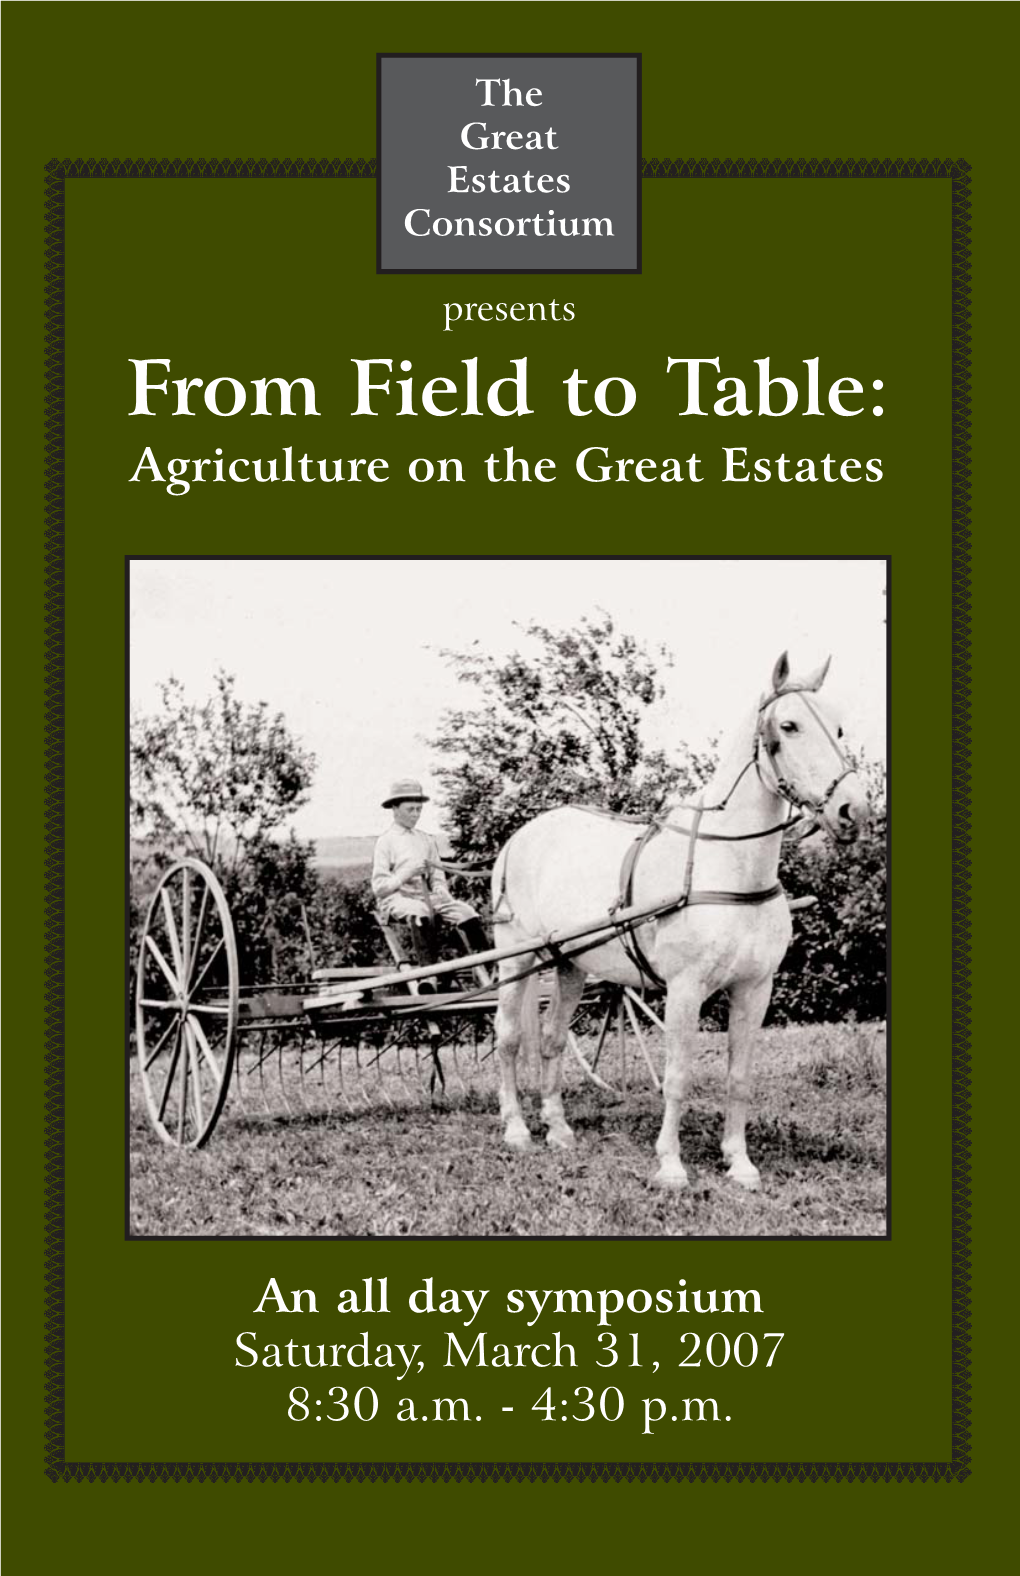 From Field to Table: Agriculture on the Great Estates